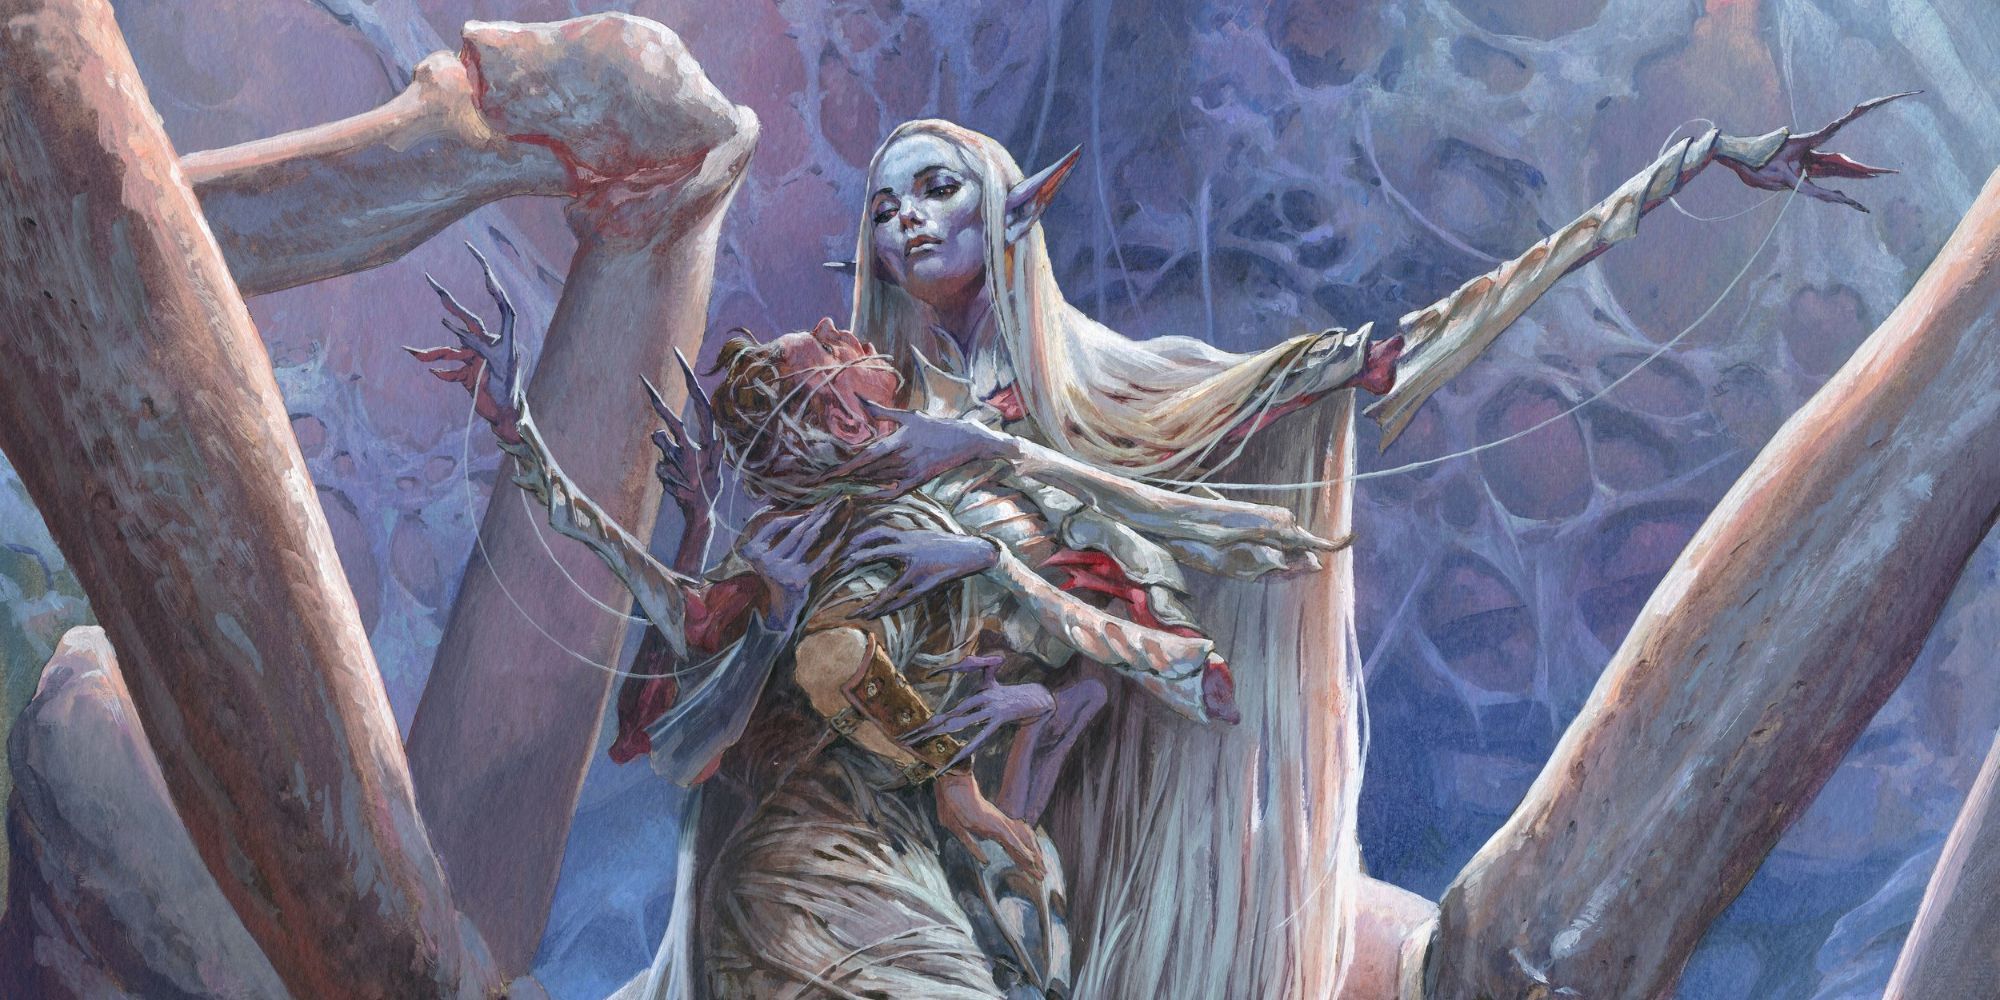 The goddess Lolth, wrapped in webs, emerges from a spider's mouth in official art from the Magic the Gathering expansion Adventures in the Forgotten Realms.